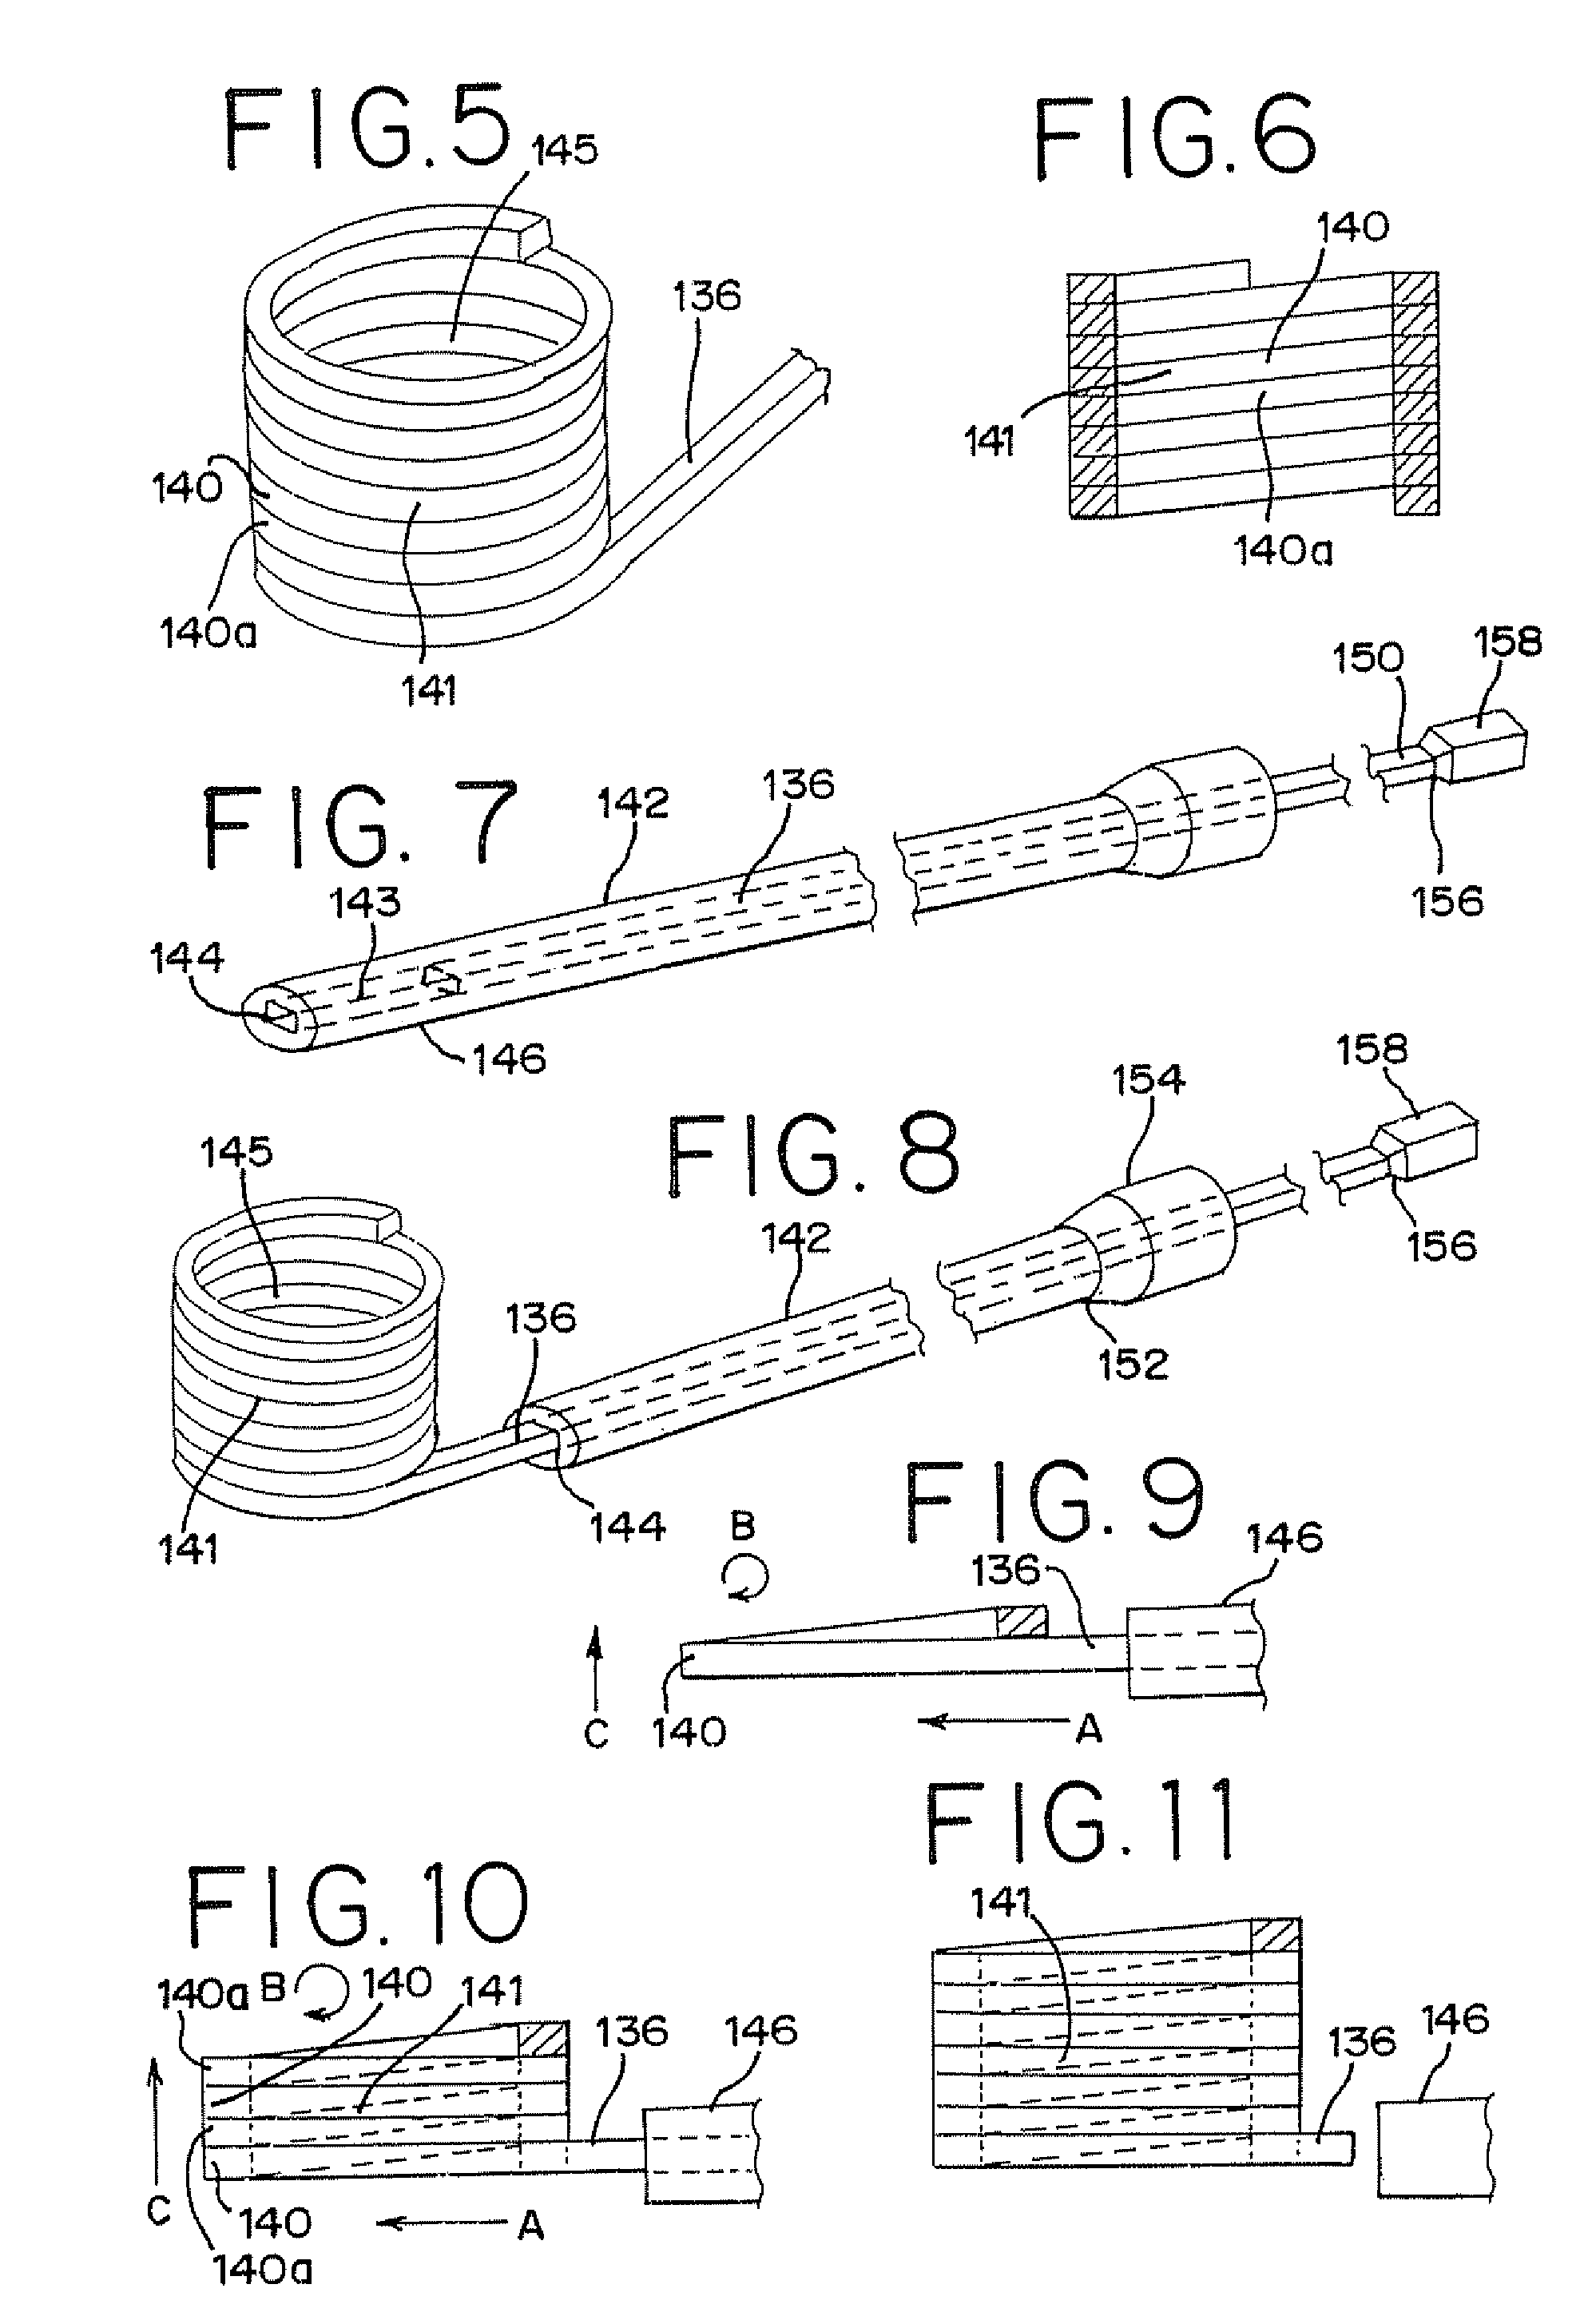 Methods for Limiting the Movement of Material Introduced Between Layers of Spinal Tissue